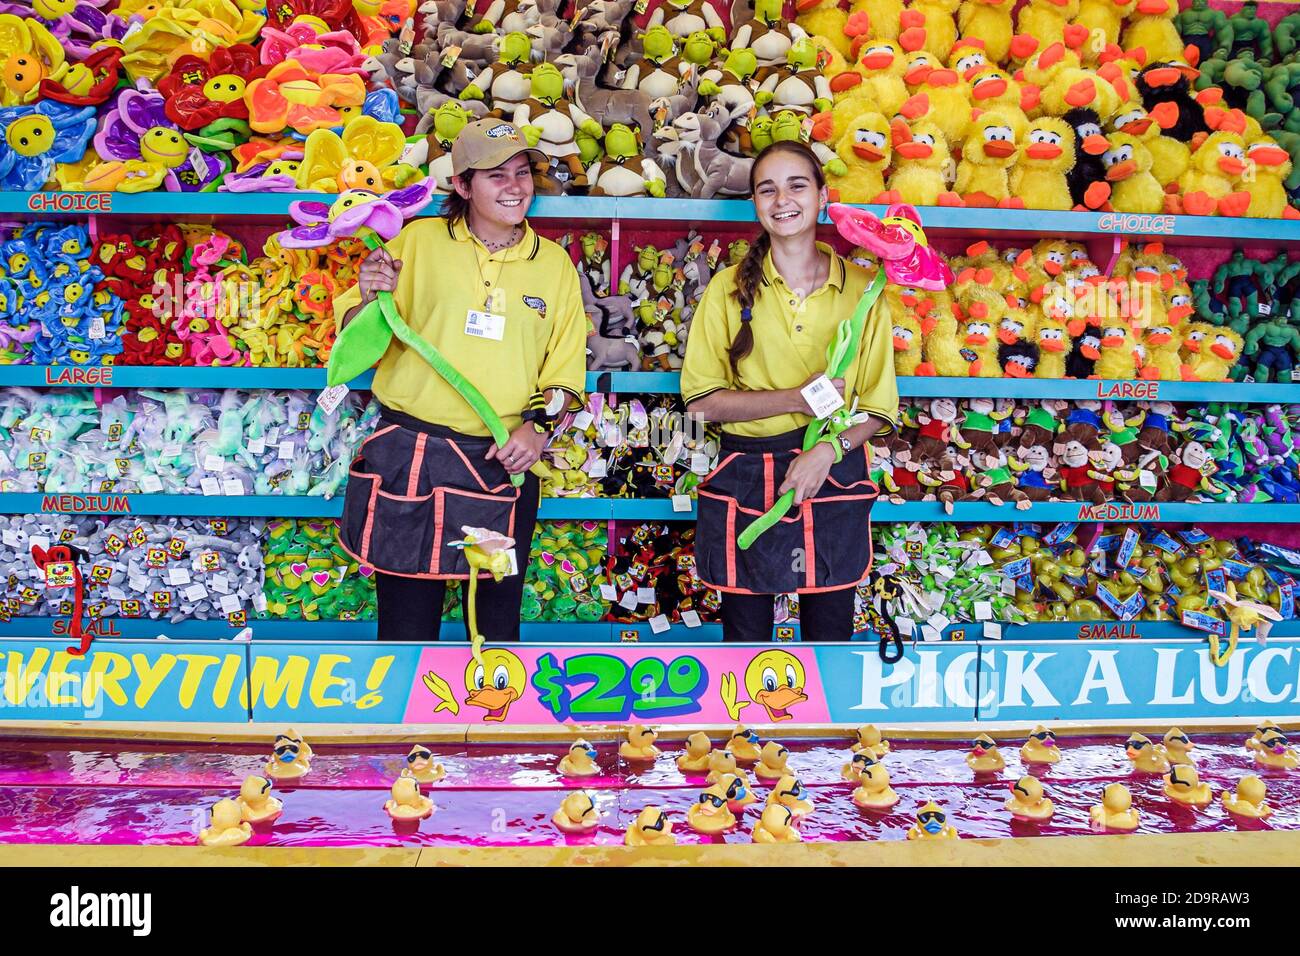 Miami Florida,Dade County Fair & Exposition,evento annuale carnevale Midway game premies ripieni Animali,teen teen teenager teenagers girls girl summer e. Foto Stock